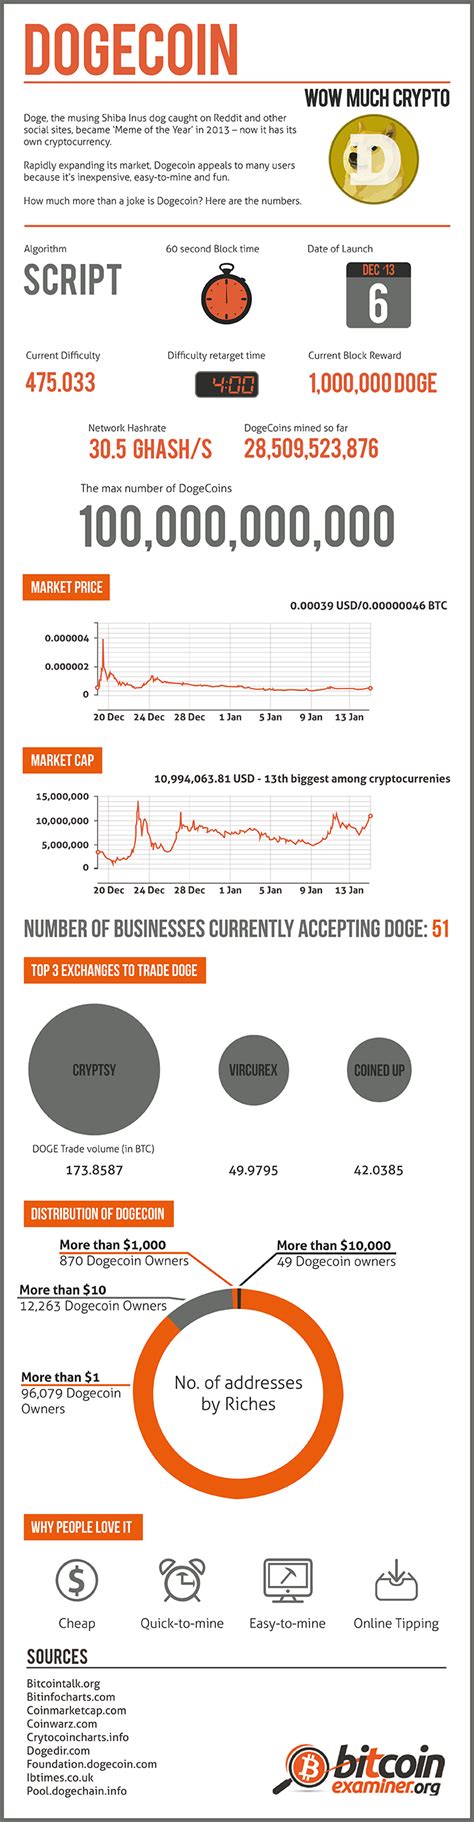 At the press time, the price of. What is Up With Dogecoin? Infographic - Business 2 Community